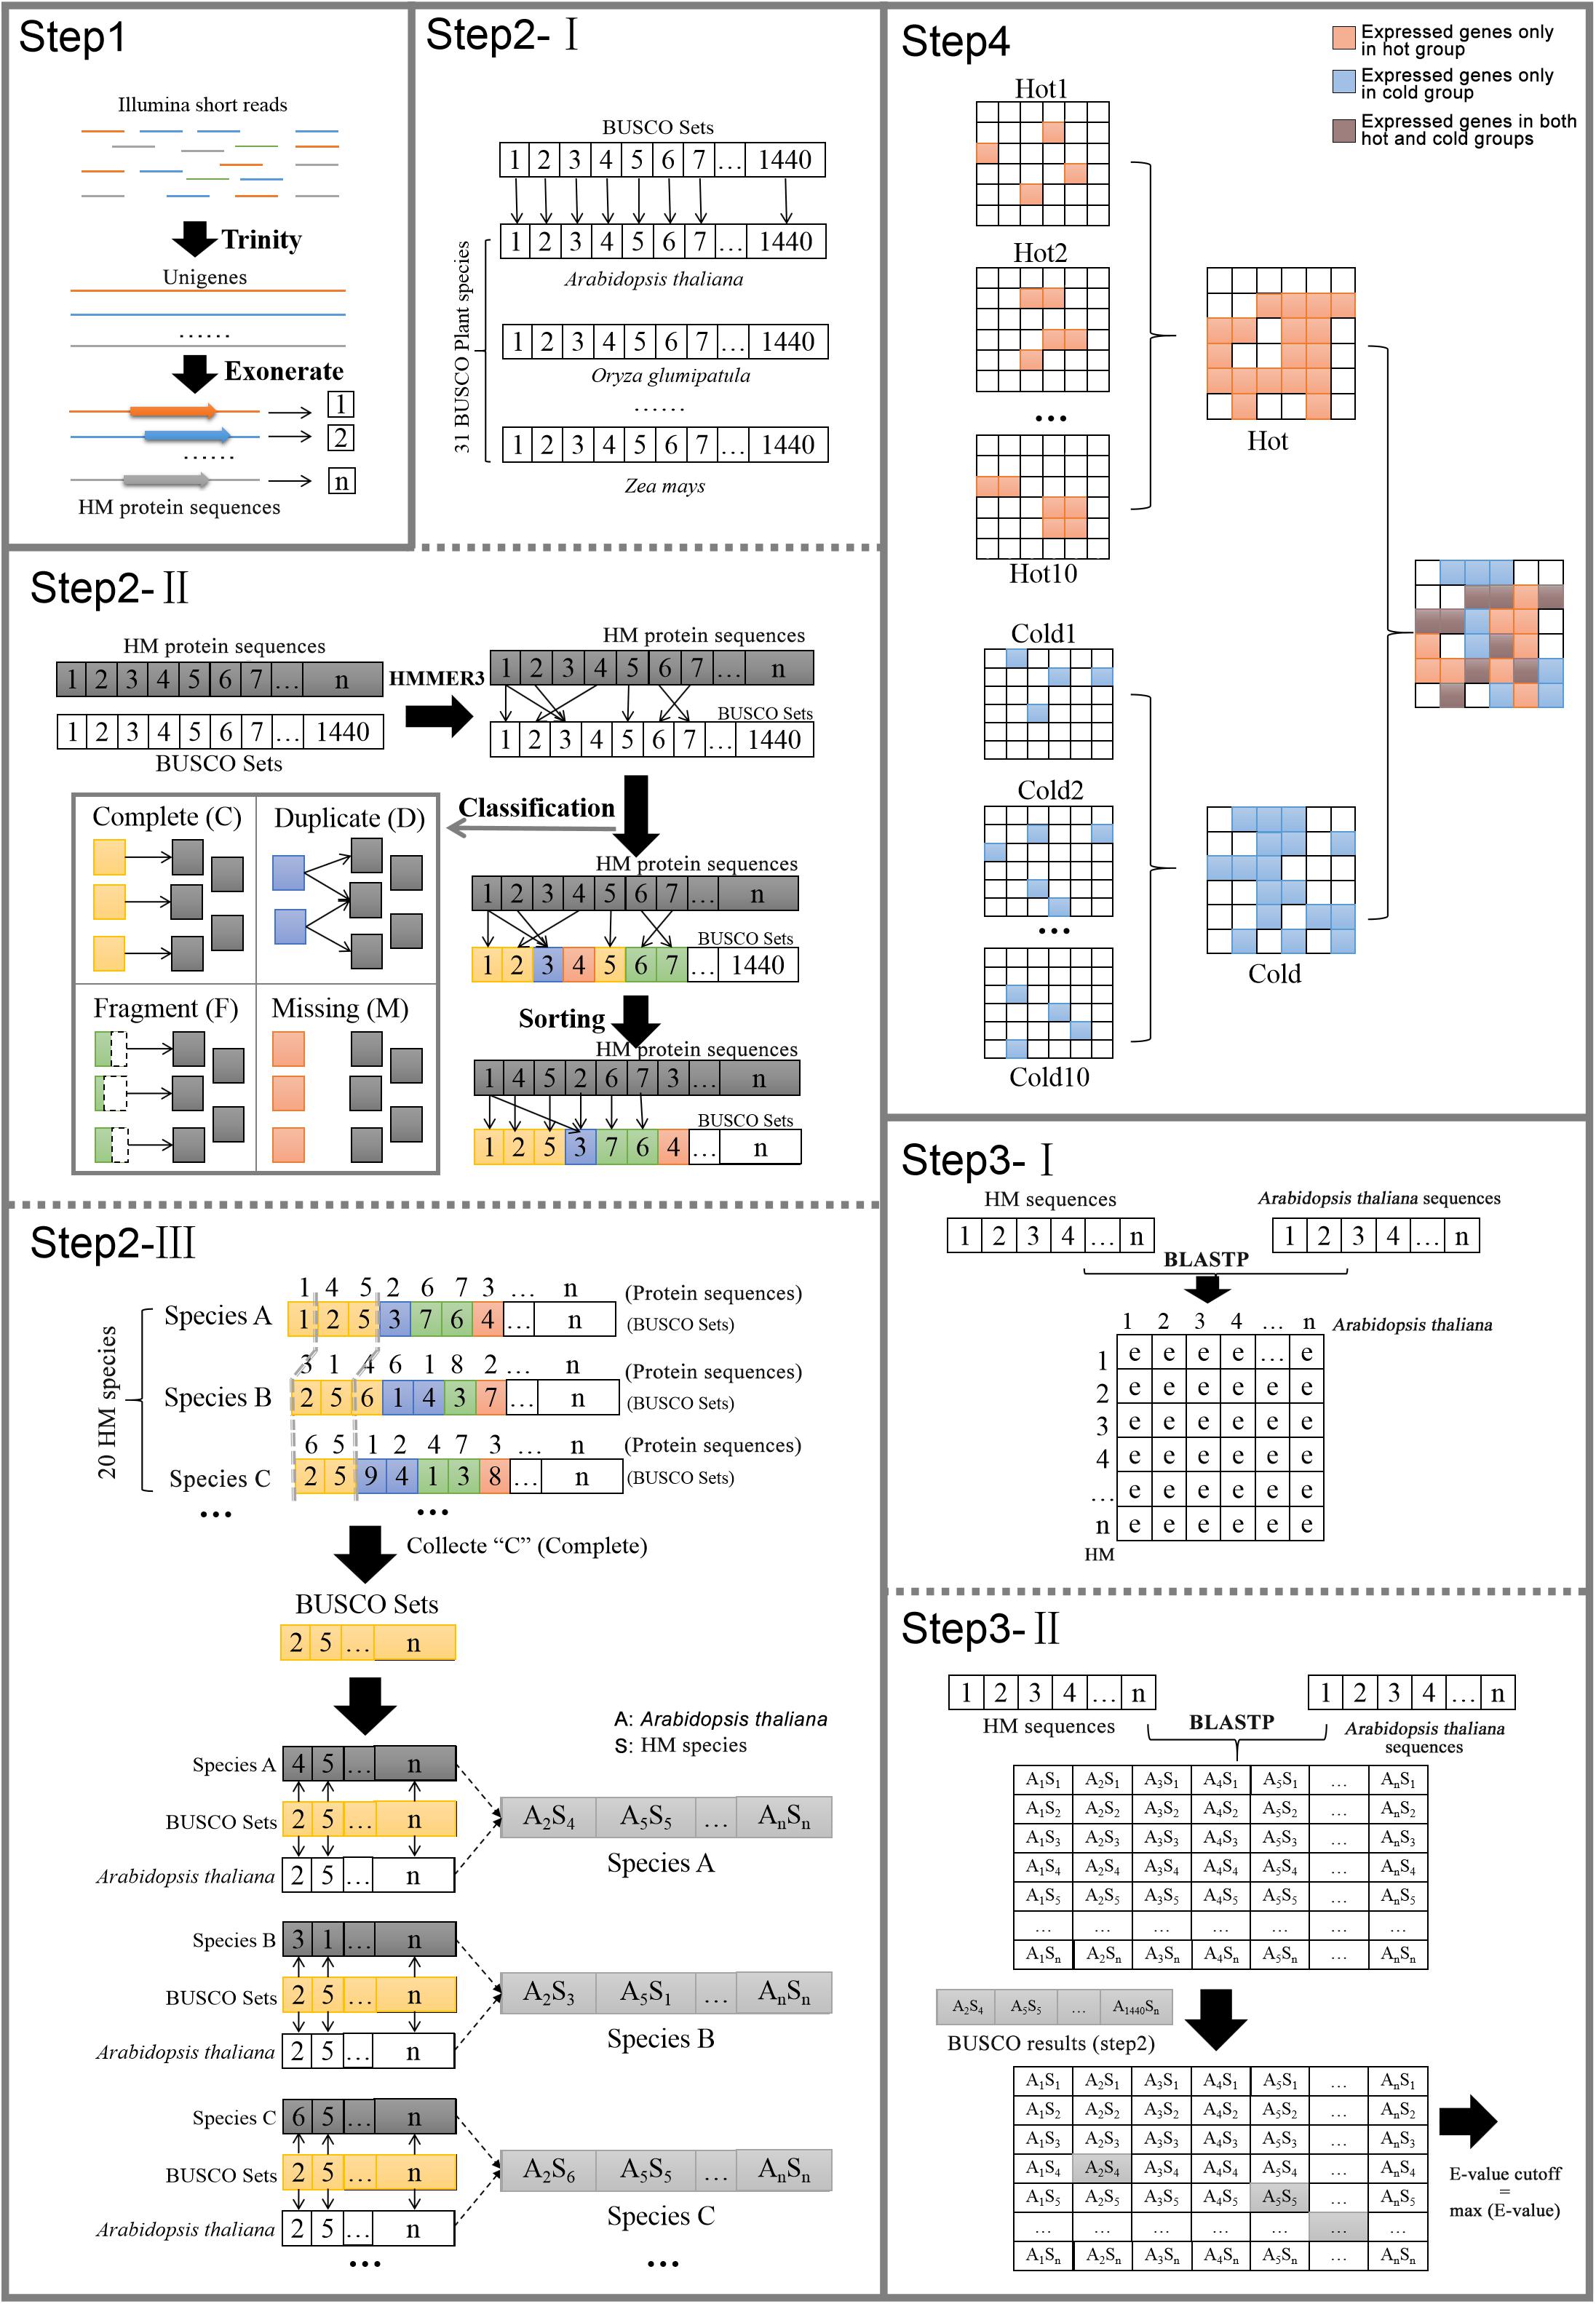 Frontiers | Cross-Species Annotation of Expressed Genes and Detection ...